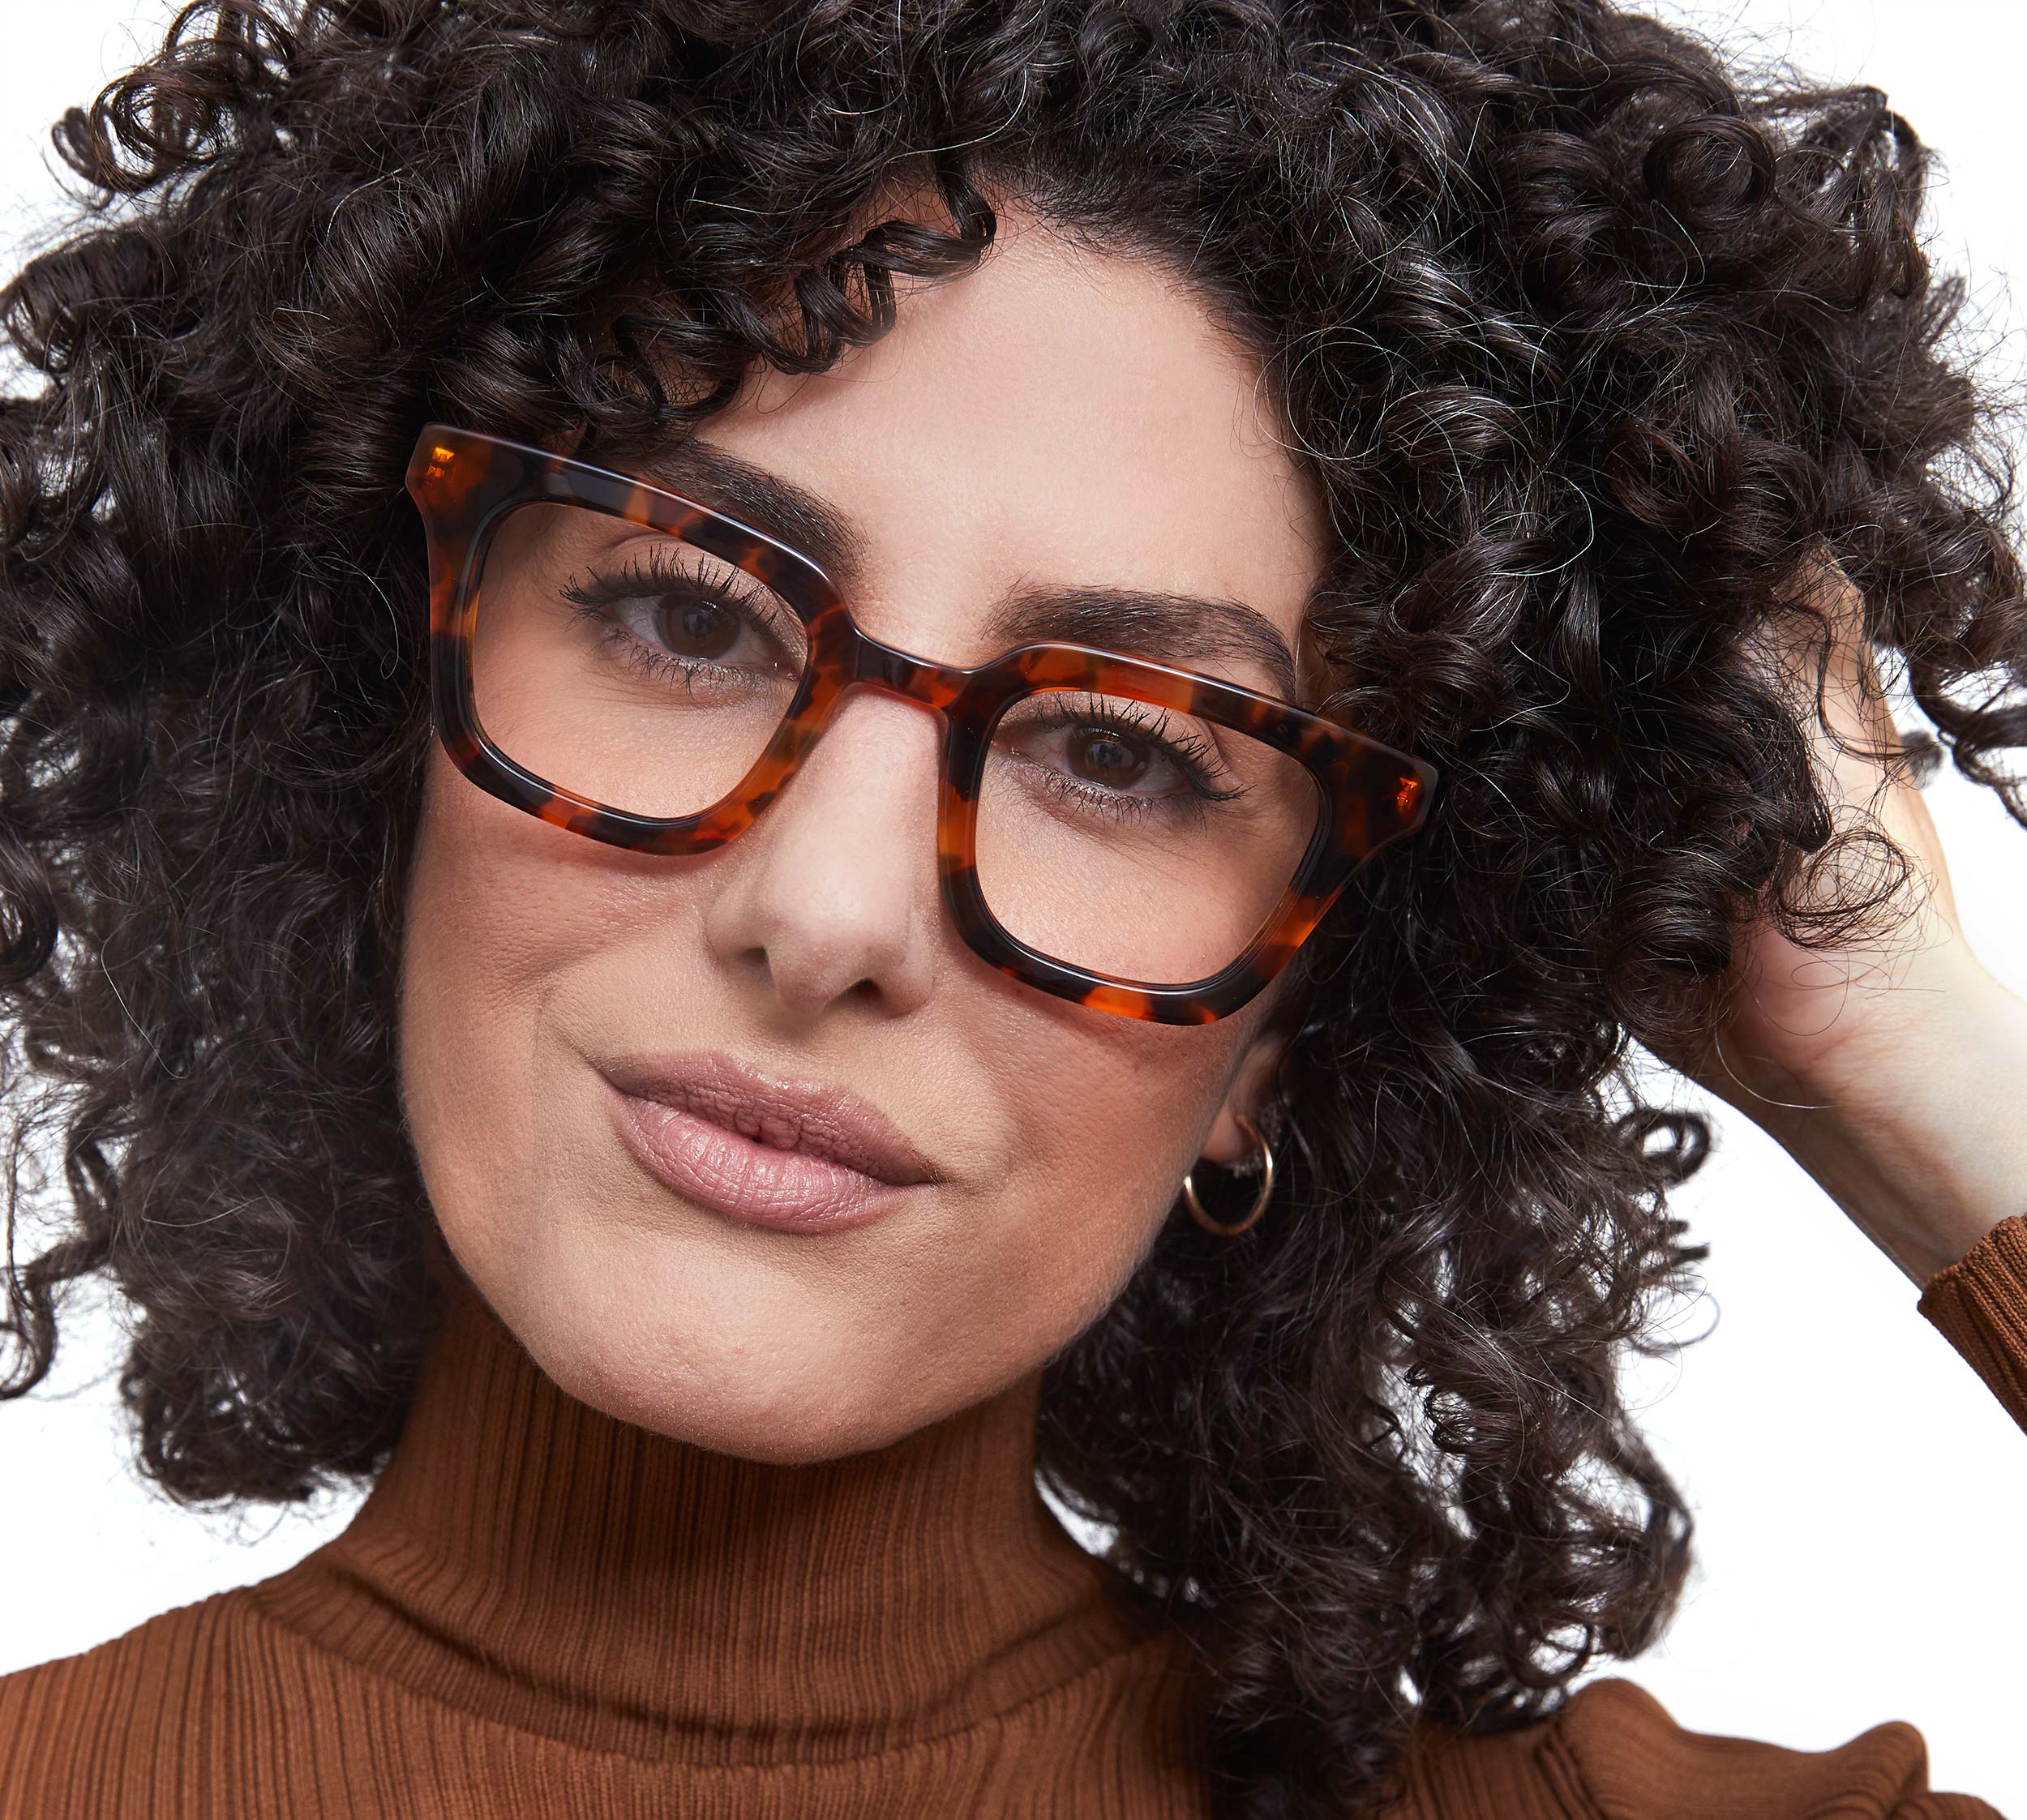 Photo of a man or woman wearing Ysée Tortoise Reading Glasses by French Kiwis